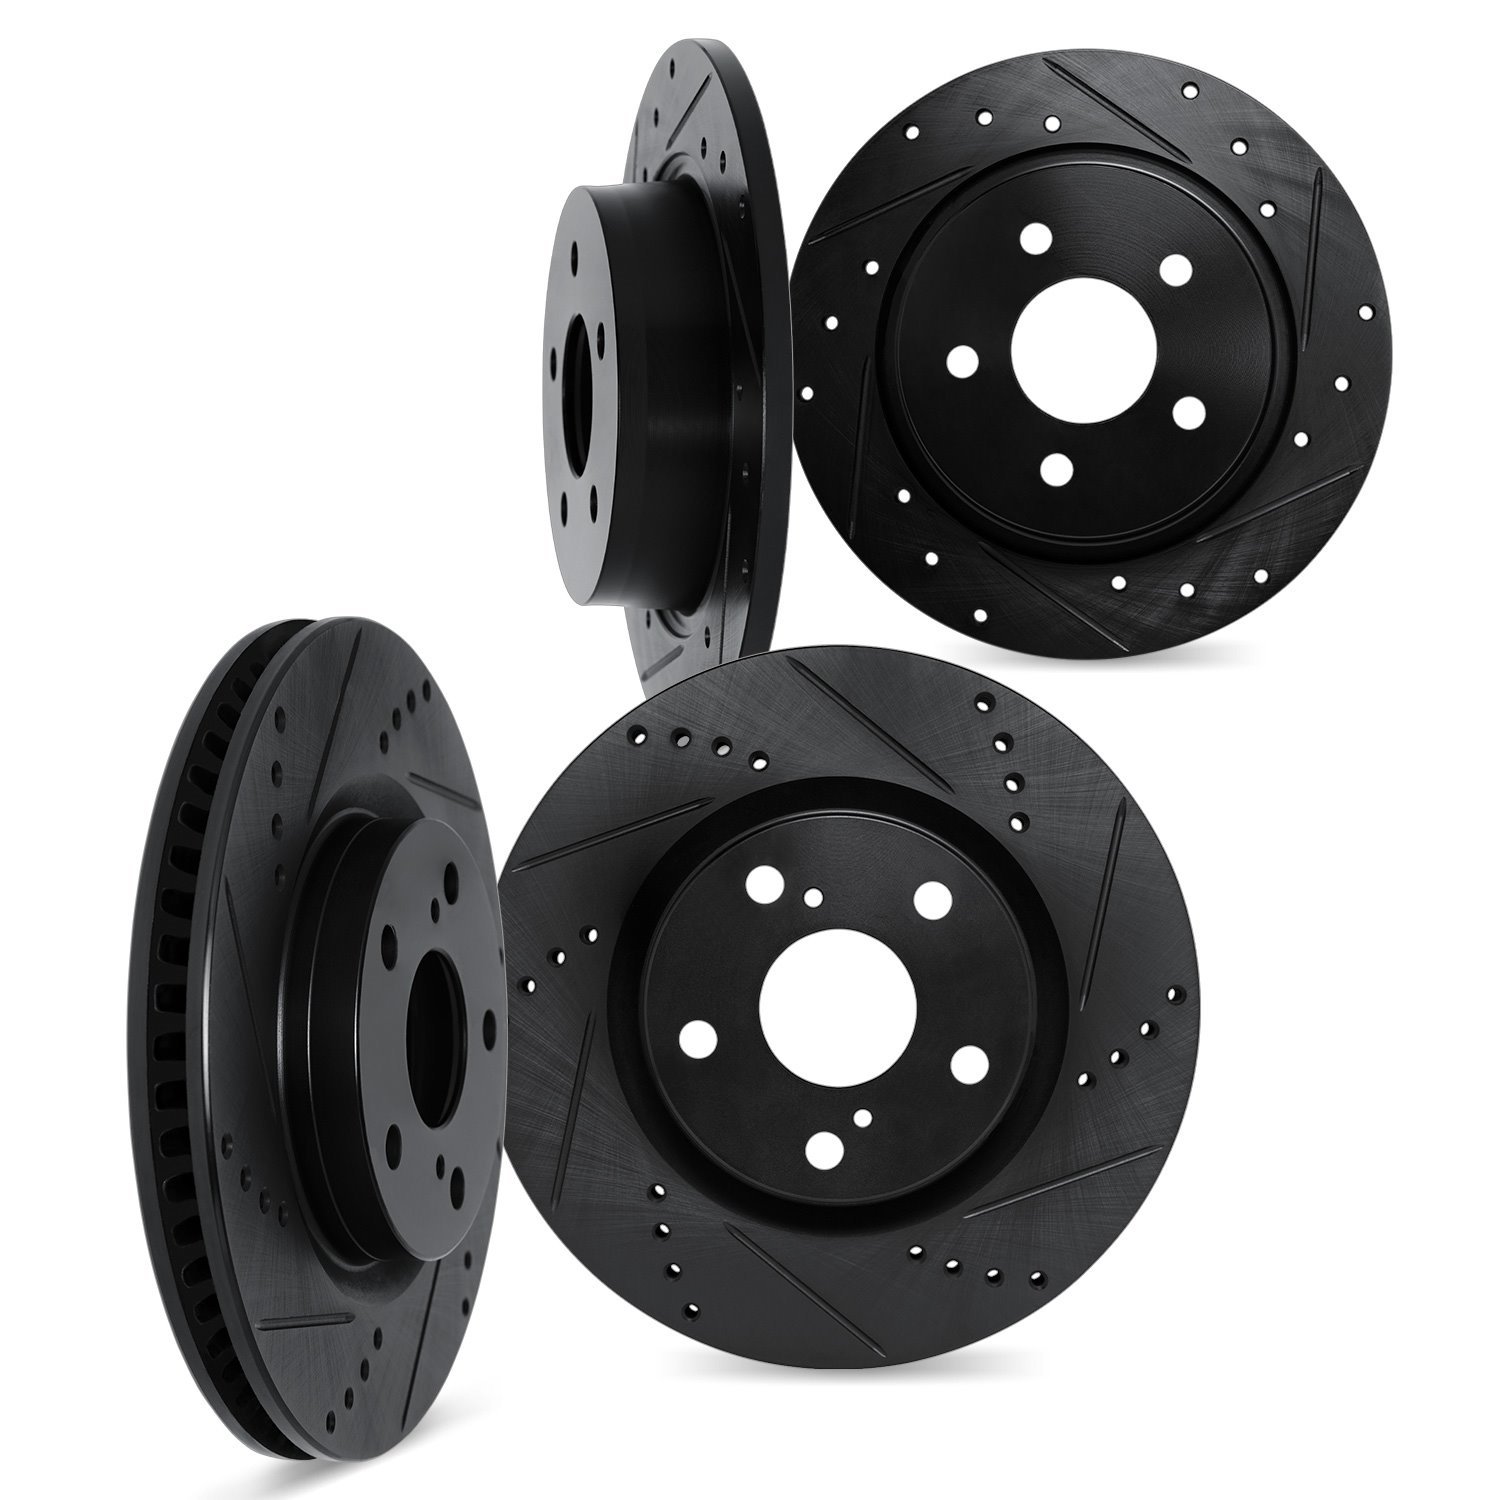 8004-73019 Drilled/Slotted Brake Rotors [Black], 2000-2008 Audi/Volkswagen, Position: Front and Rear